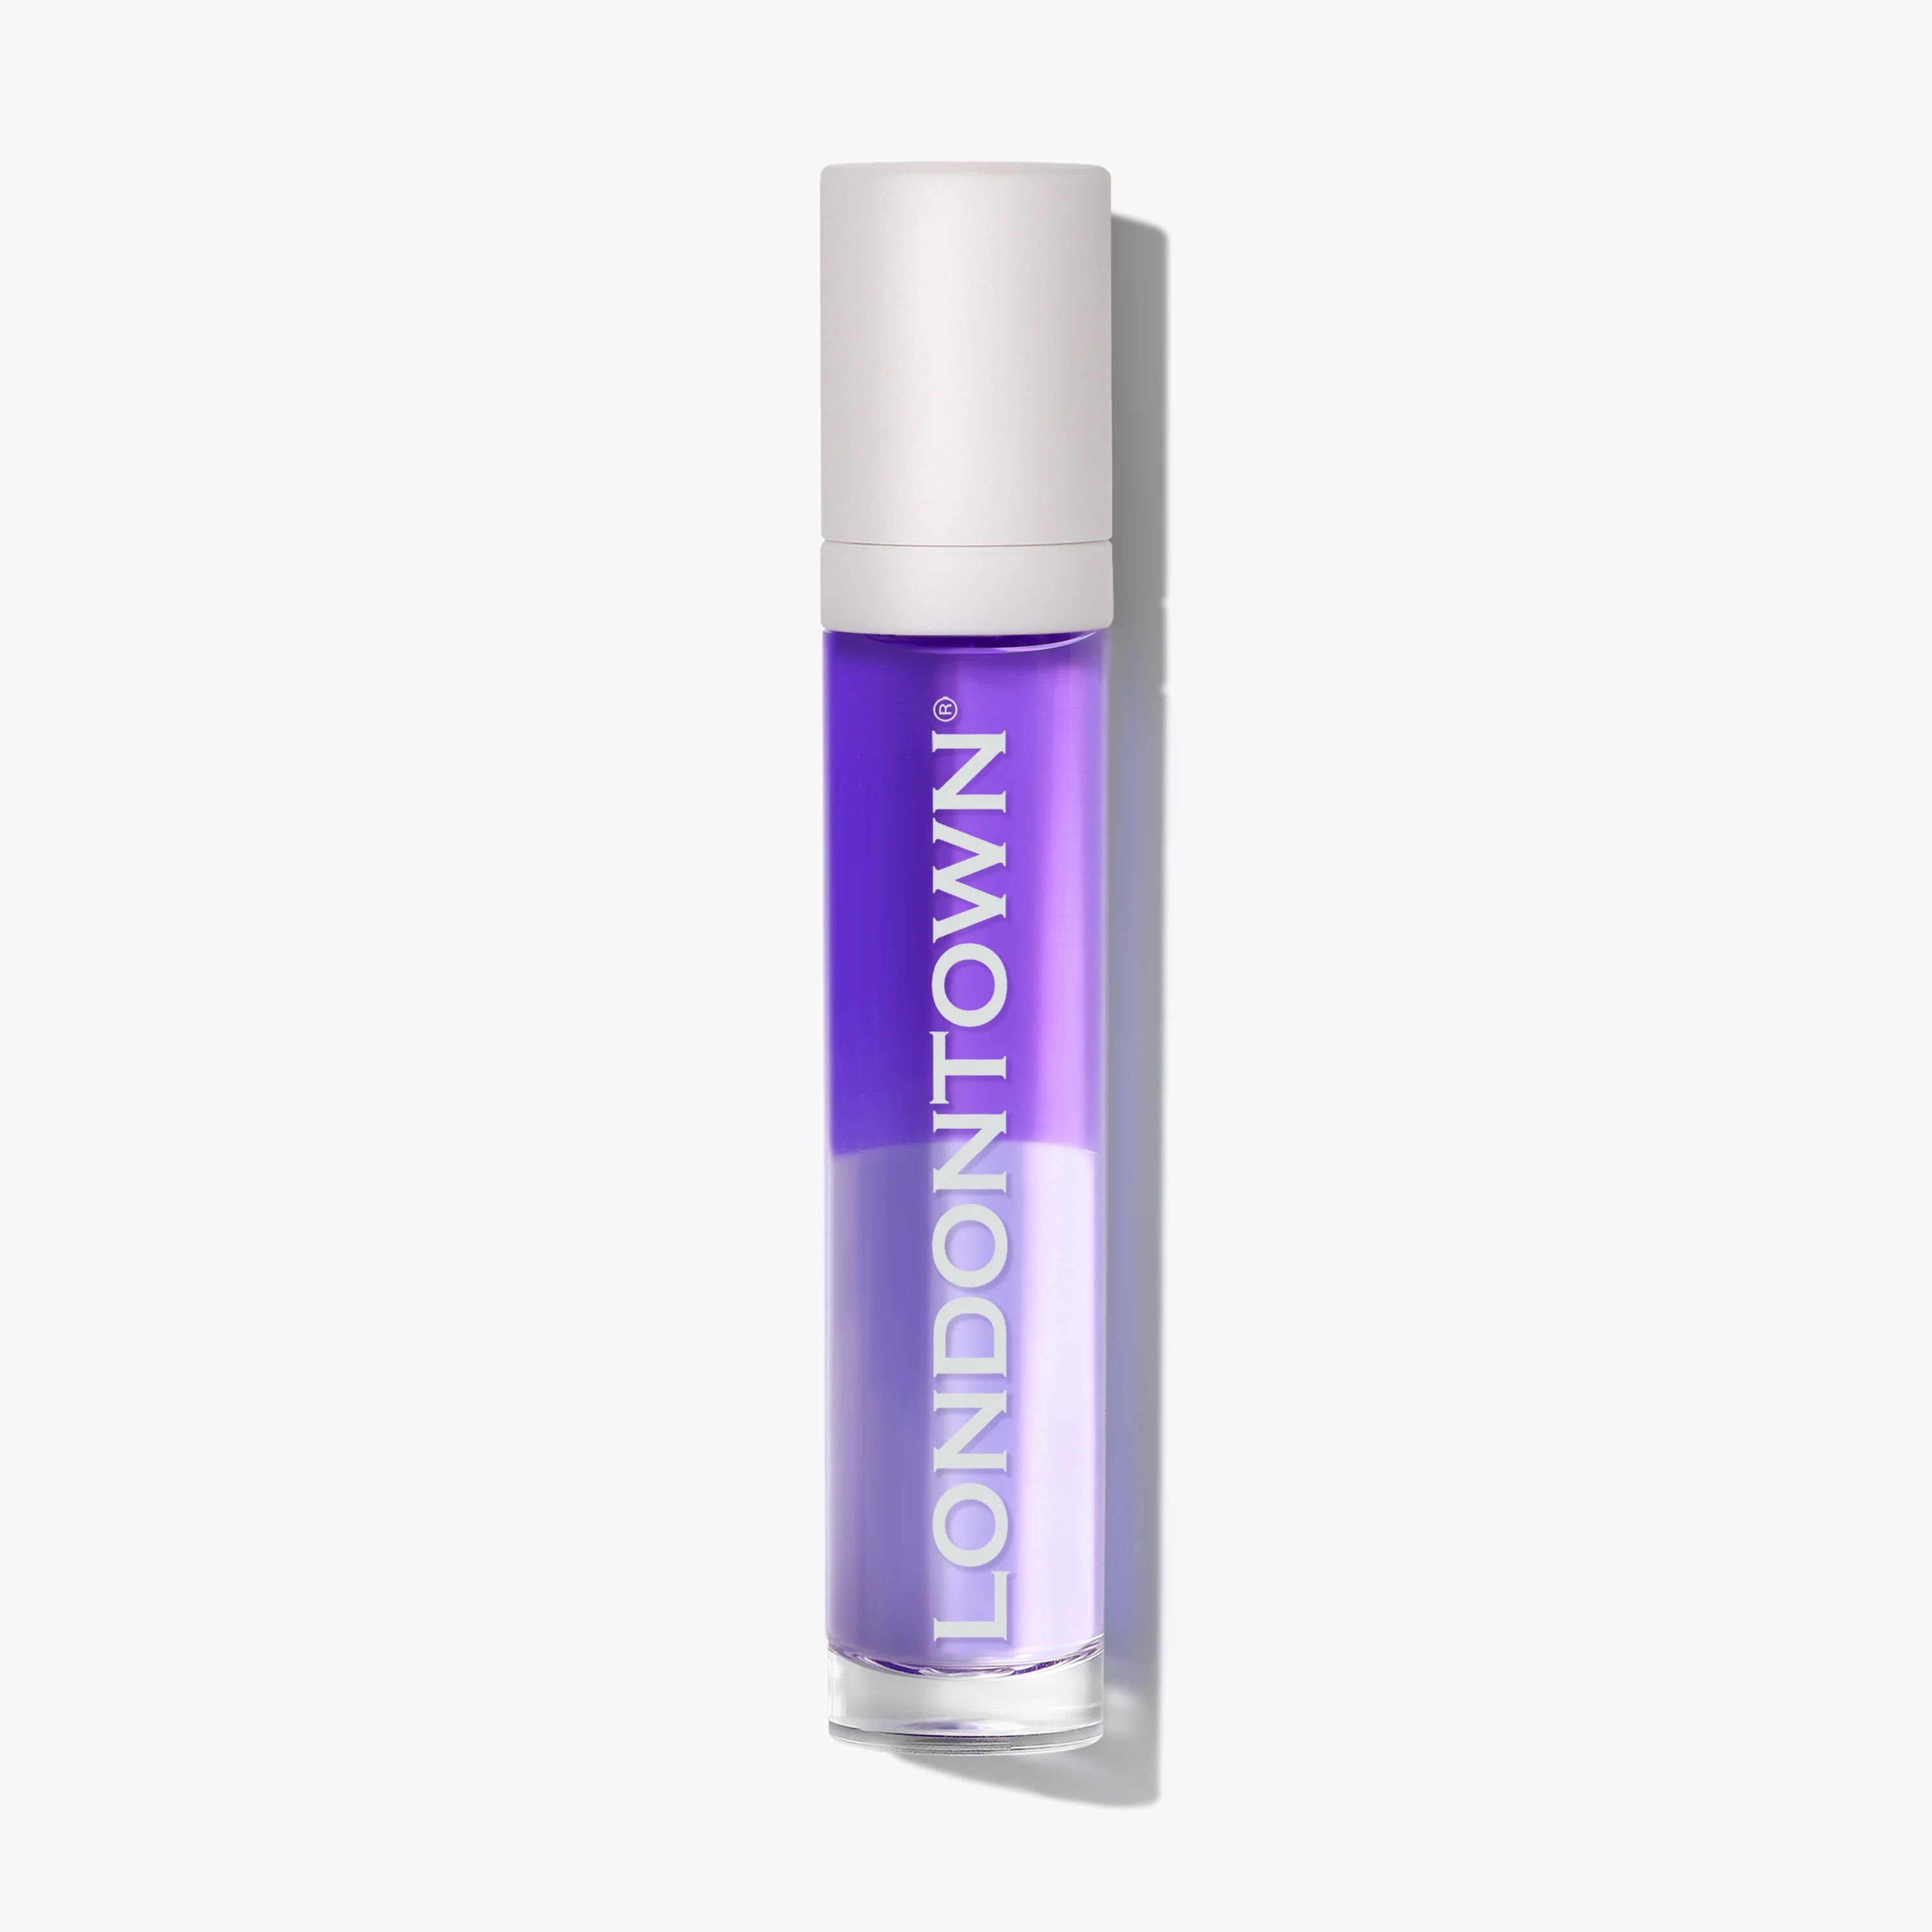 Nighttime Cuticle Quench - Lavender | Londontown